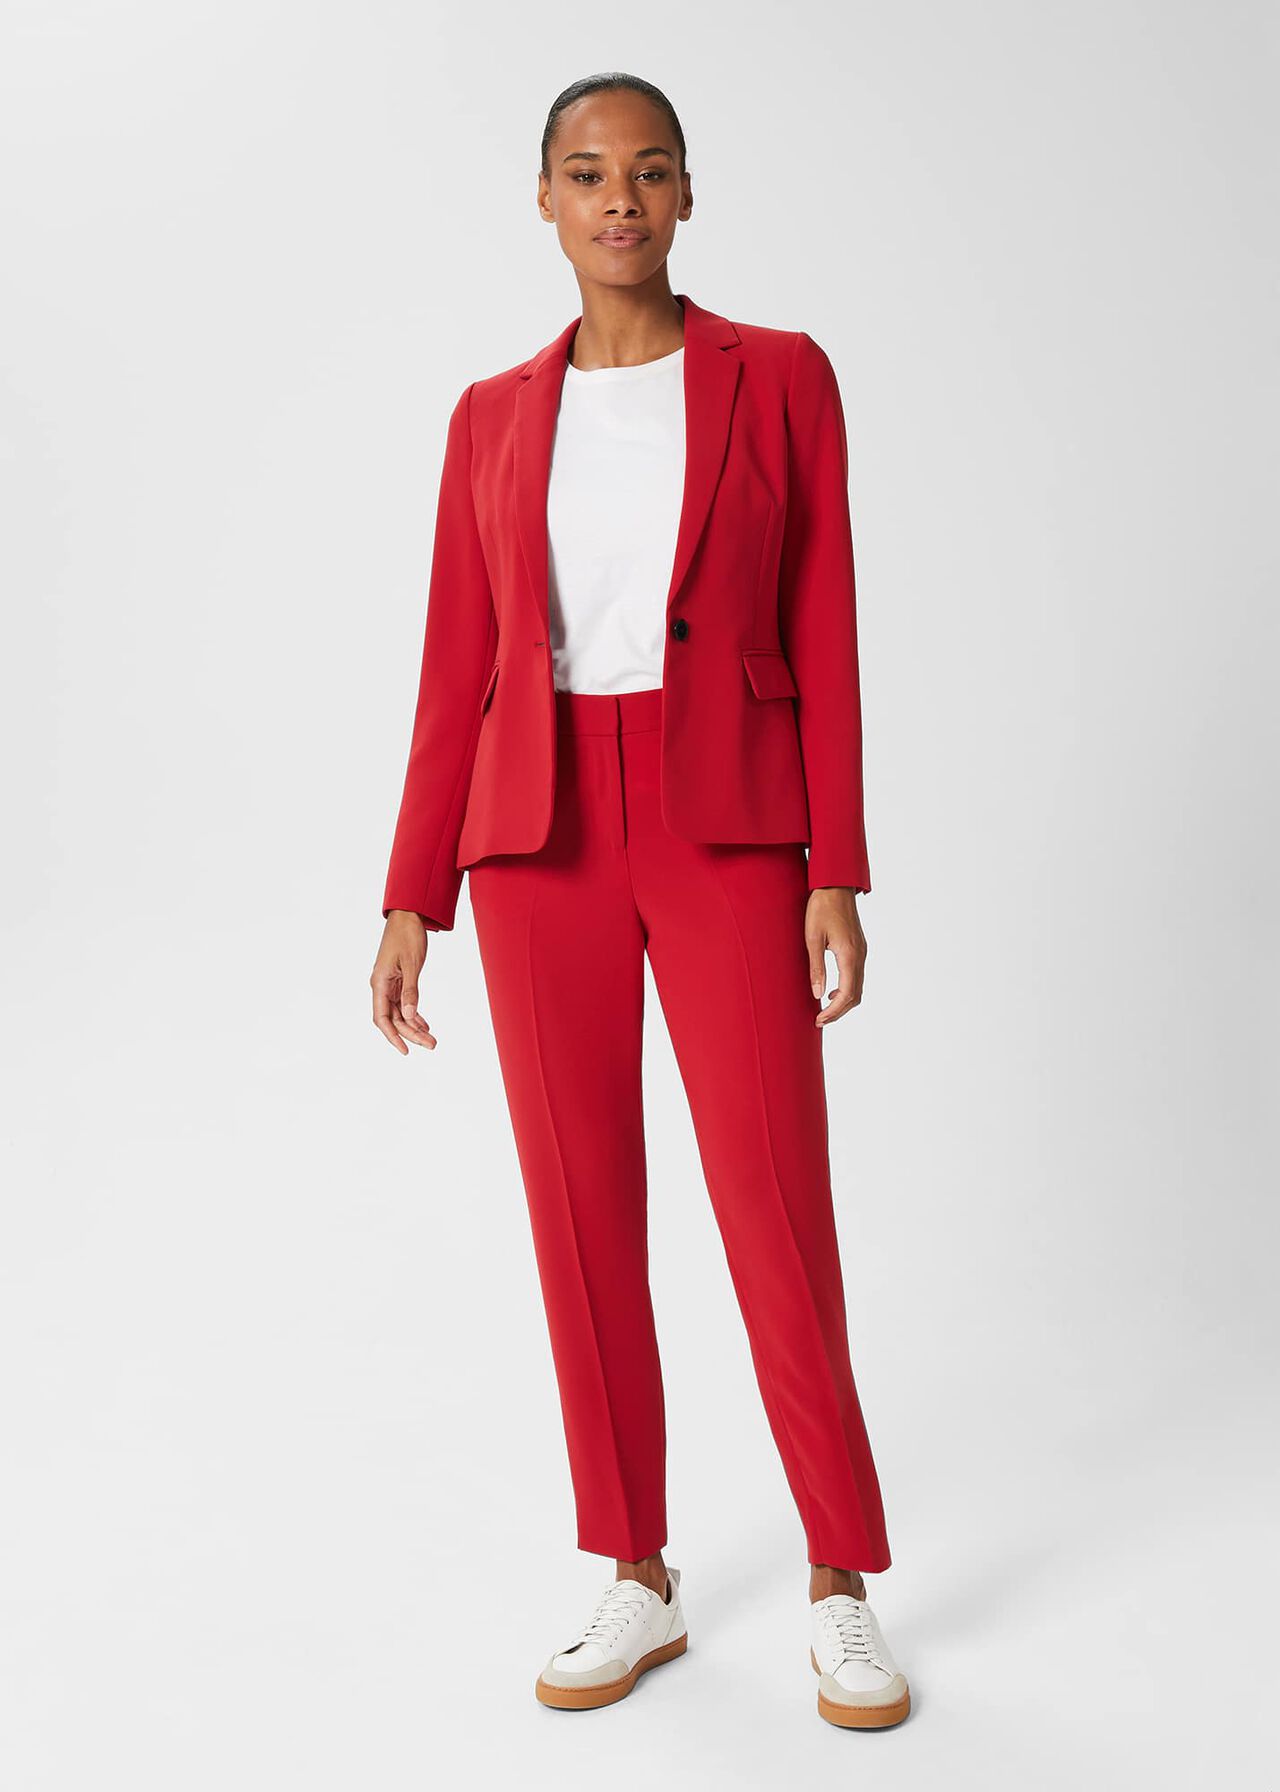 Buy Red Trousers & Pants for Women by Outryt Online